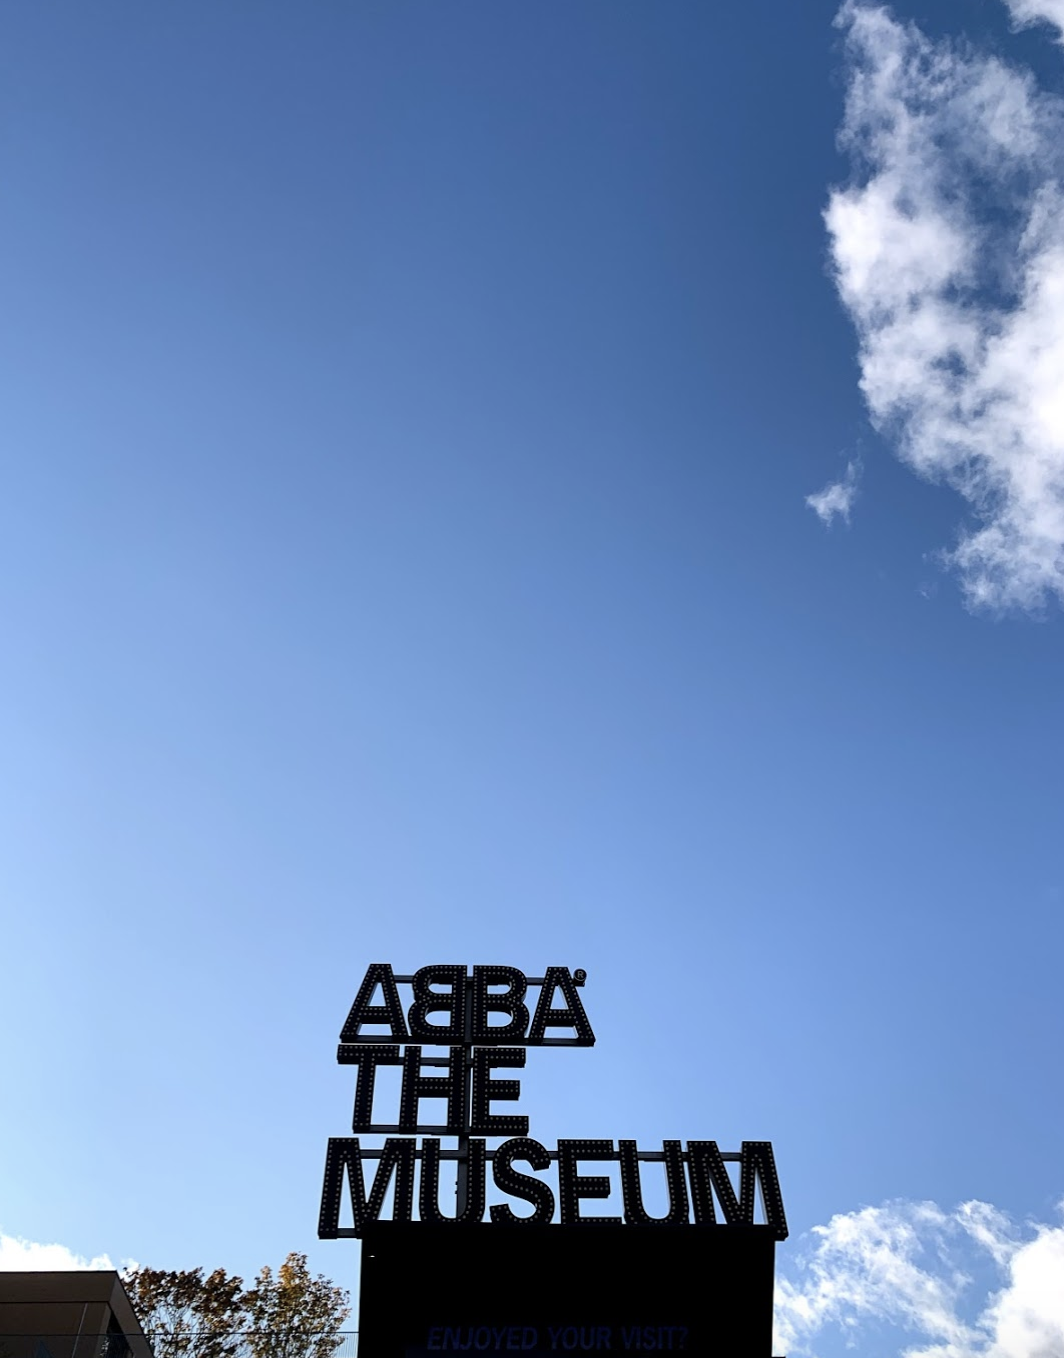 Abba Museum, Stockholm